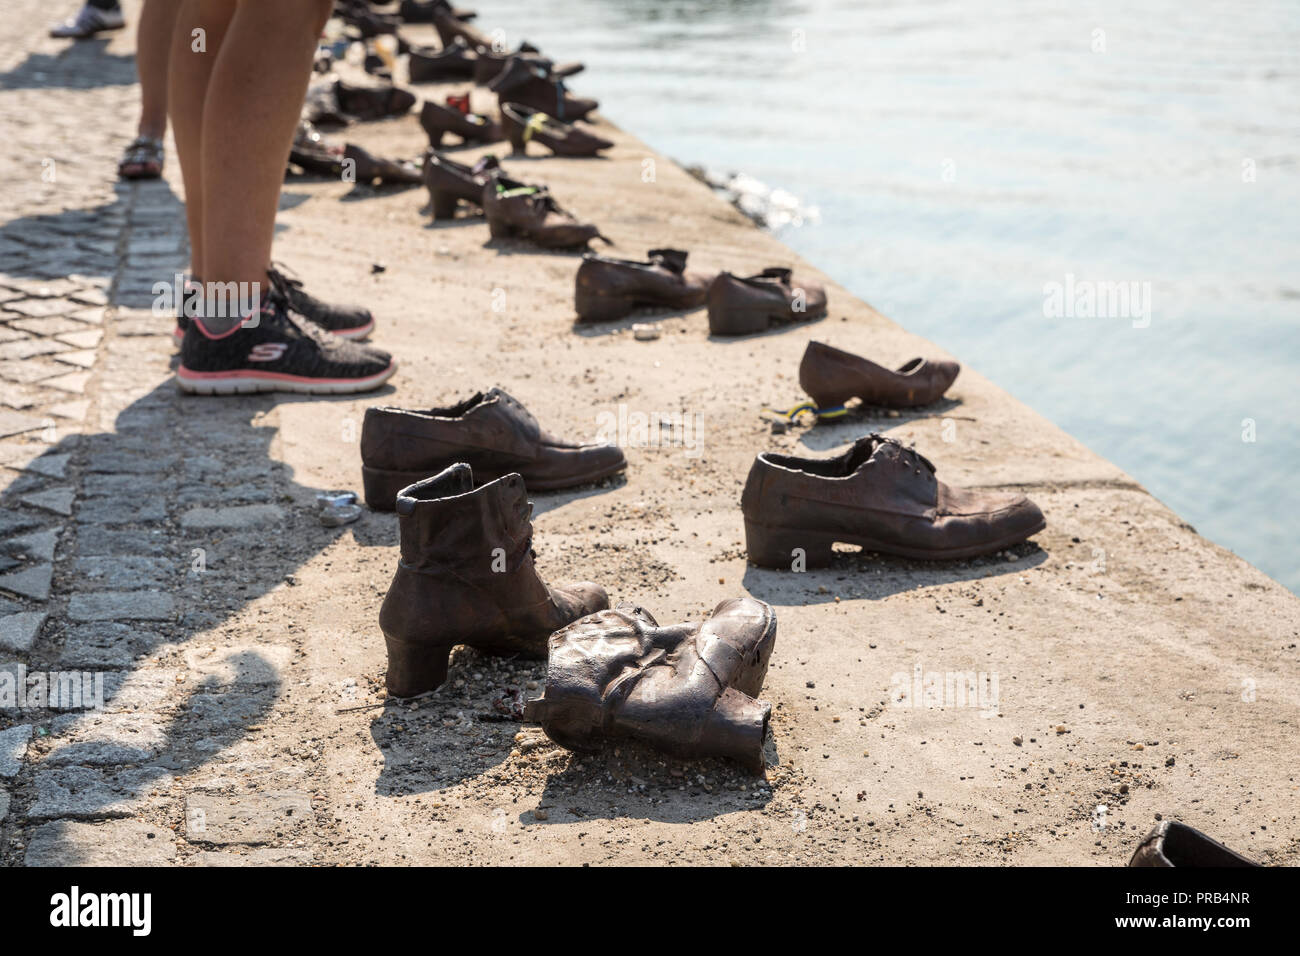 A poignant memorial on the bank of the Danube in Budapest are these cast iron shoes sculpted by Gyula Pauer and conceived by Can Togay. The shoes comm Stock Photo